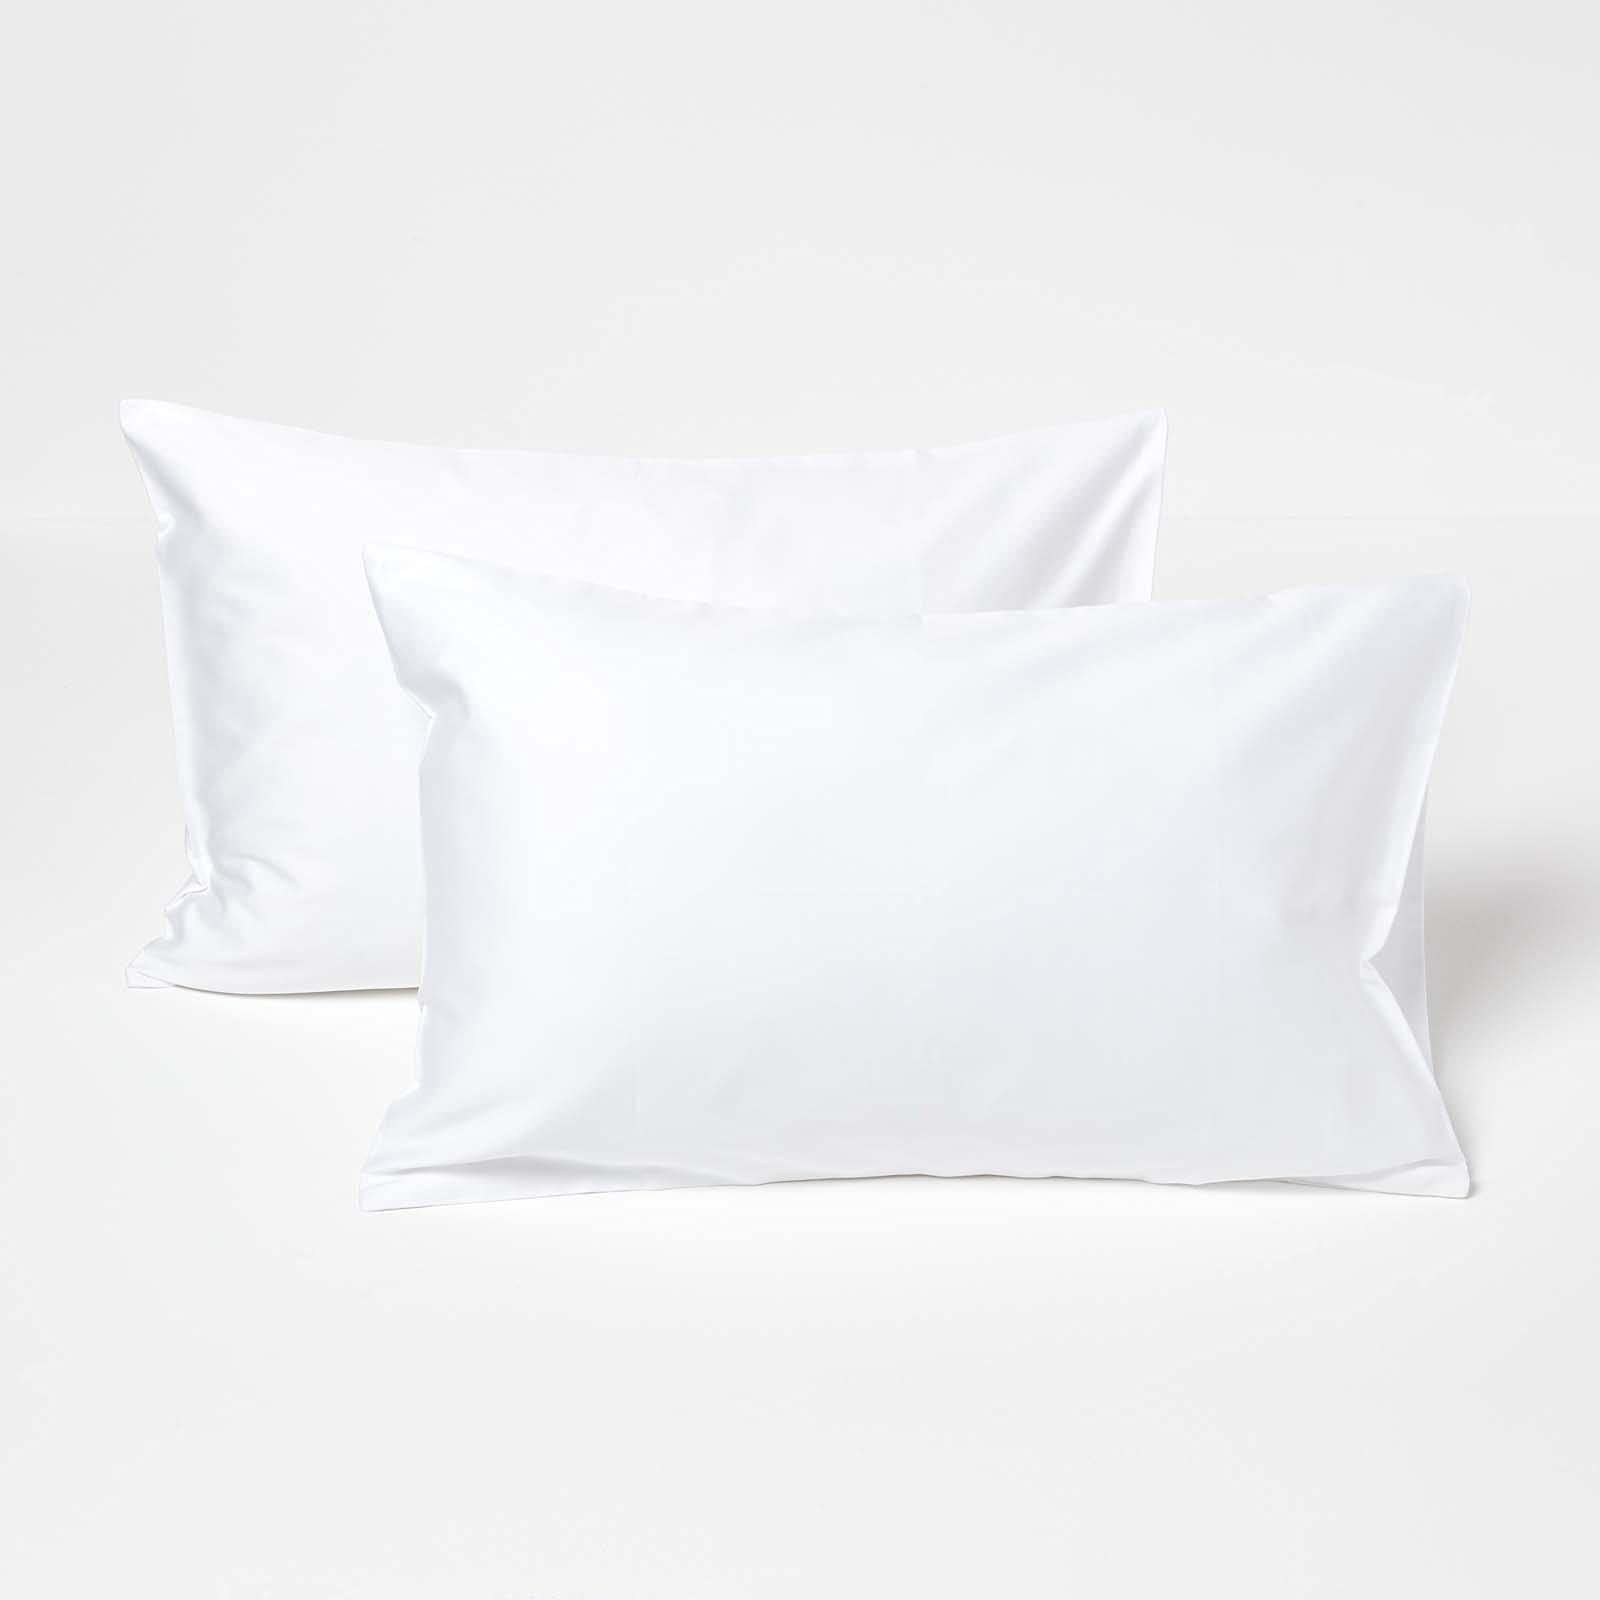 HOMESCAPES White Kid’s Pillowcases 60 x 40 cm 2 Pack 100% Organic Cotton Percale Soft Hypoallergenic Children’s Pillow Cases with Envelope Close Breathable Easy Care 400 TC 600 Thread Count Equiv